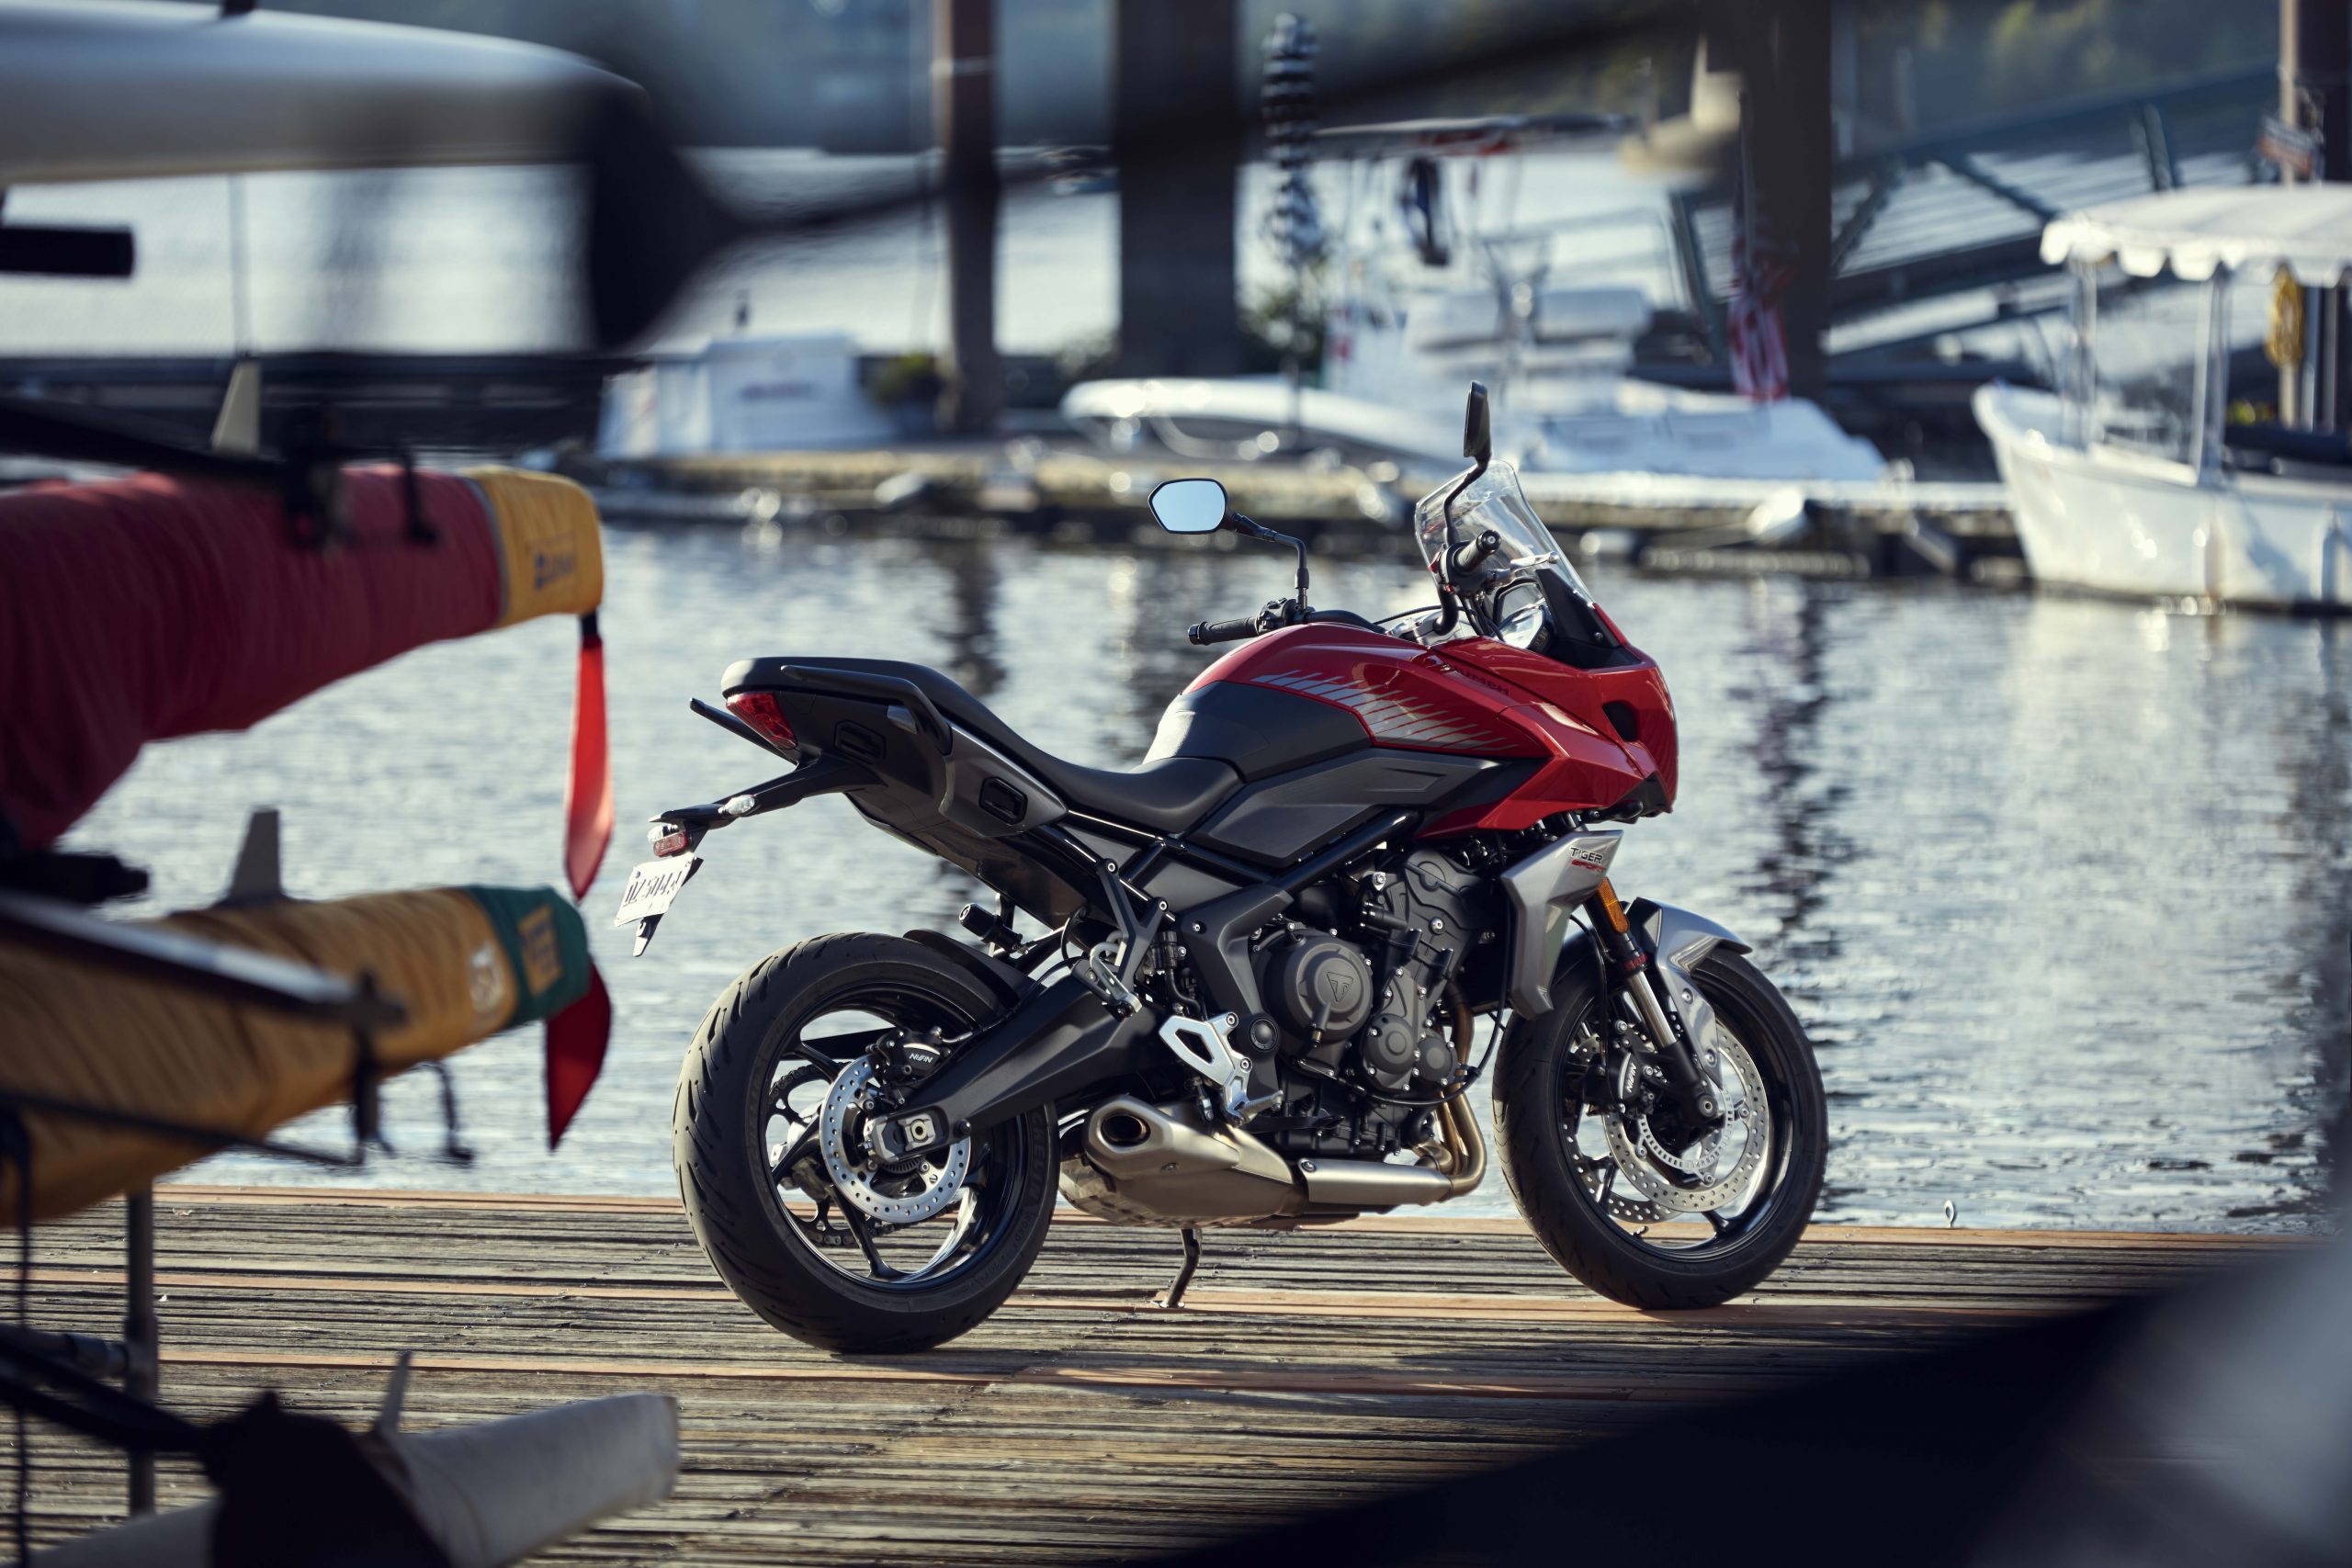 A shot of the new Triumph Tiger Sport 660 by the docks